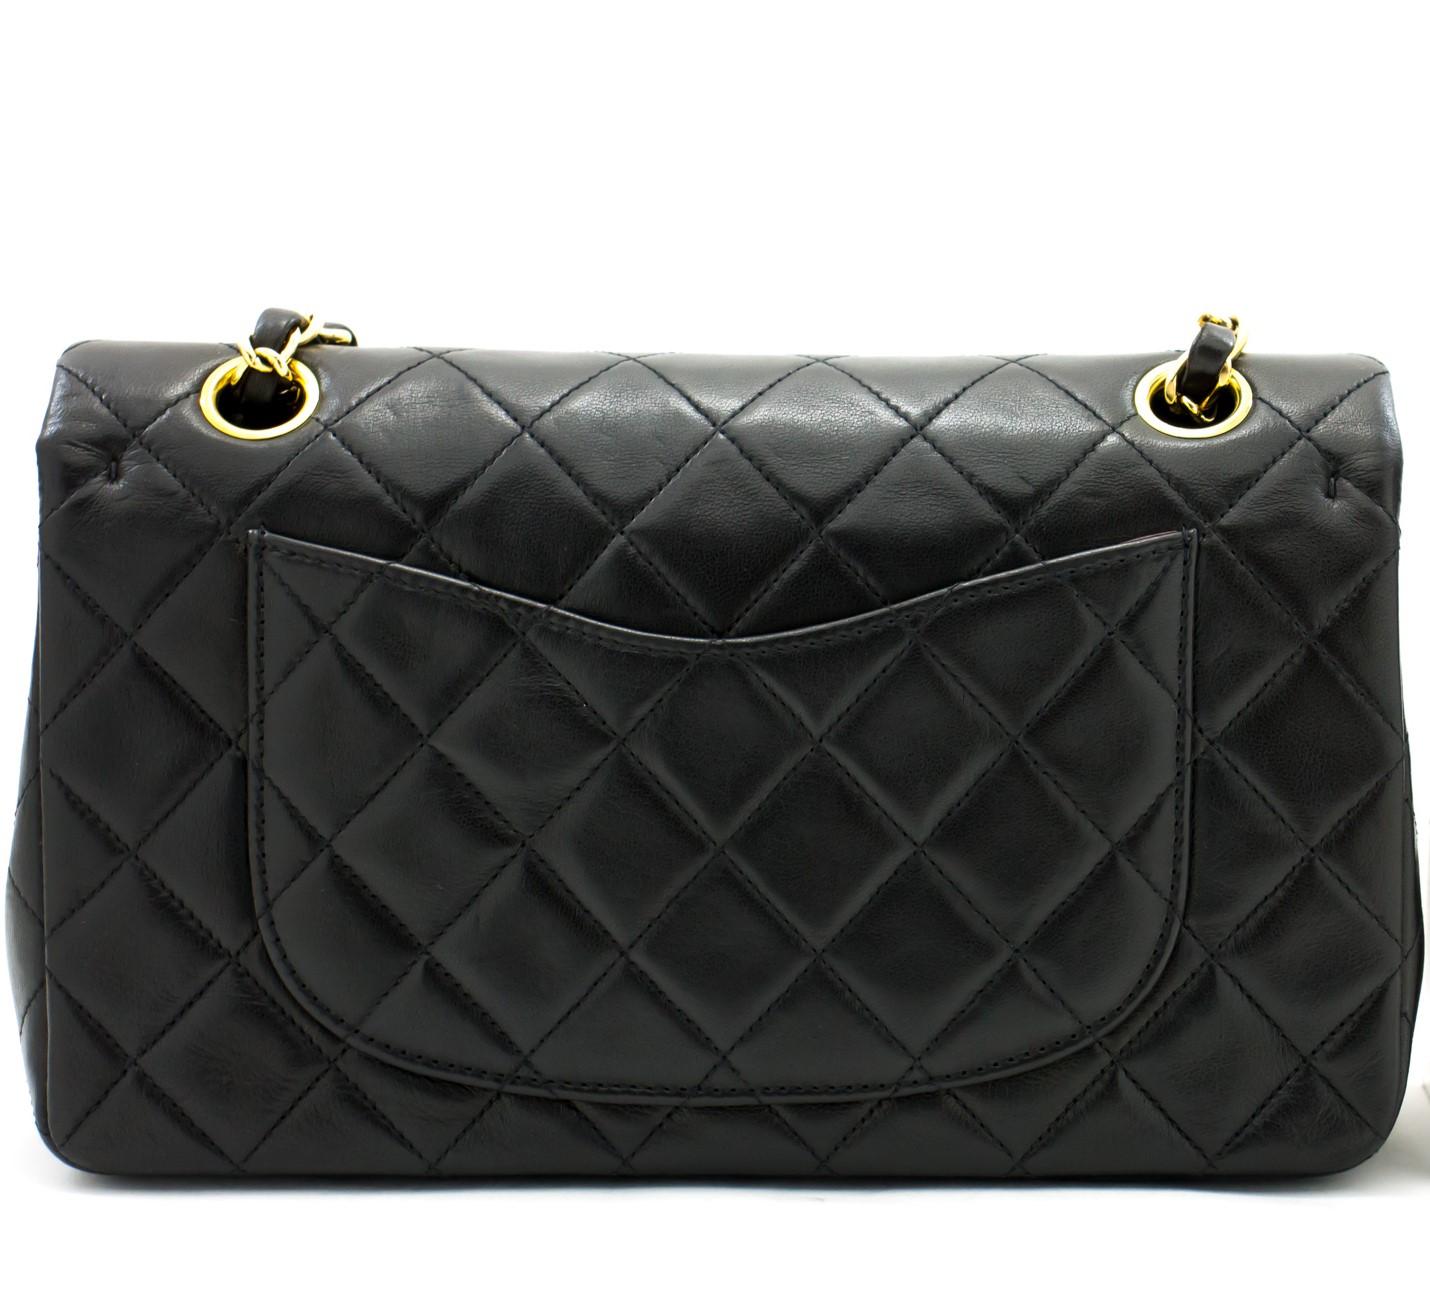 This iconic Chanel 9-inch double flap bag from 1997- 1999 has been crafted from quilted black lambskin and features a double flap. The front flap has been finished with the classic CC logo twist lock, with the second flap featuring a stud closure